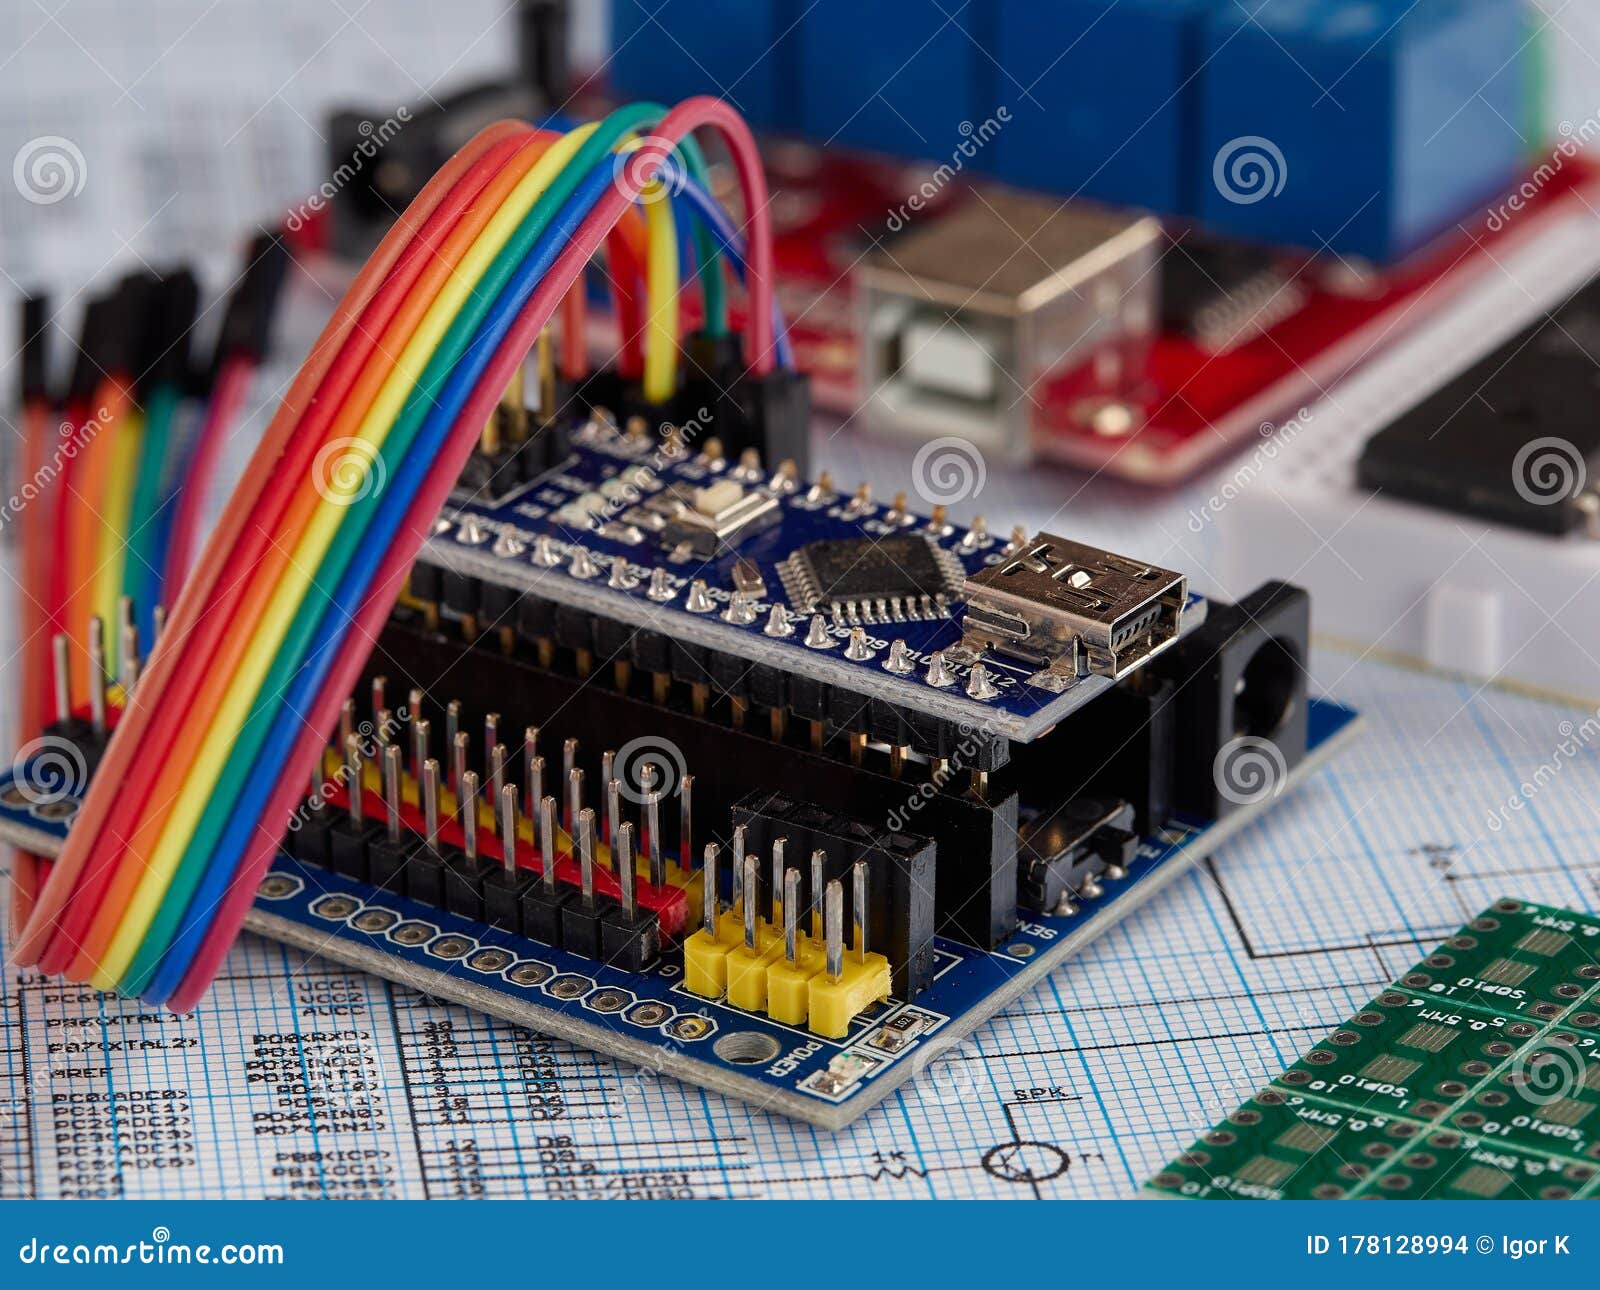 Electronic Diy Project Arduino Electronics And Microprocessor Drawing On A Light Background Do It Yourself Programming And Stock Photo Image Of Metal Hardware 178128994